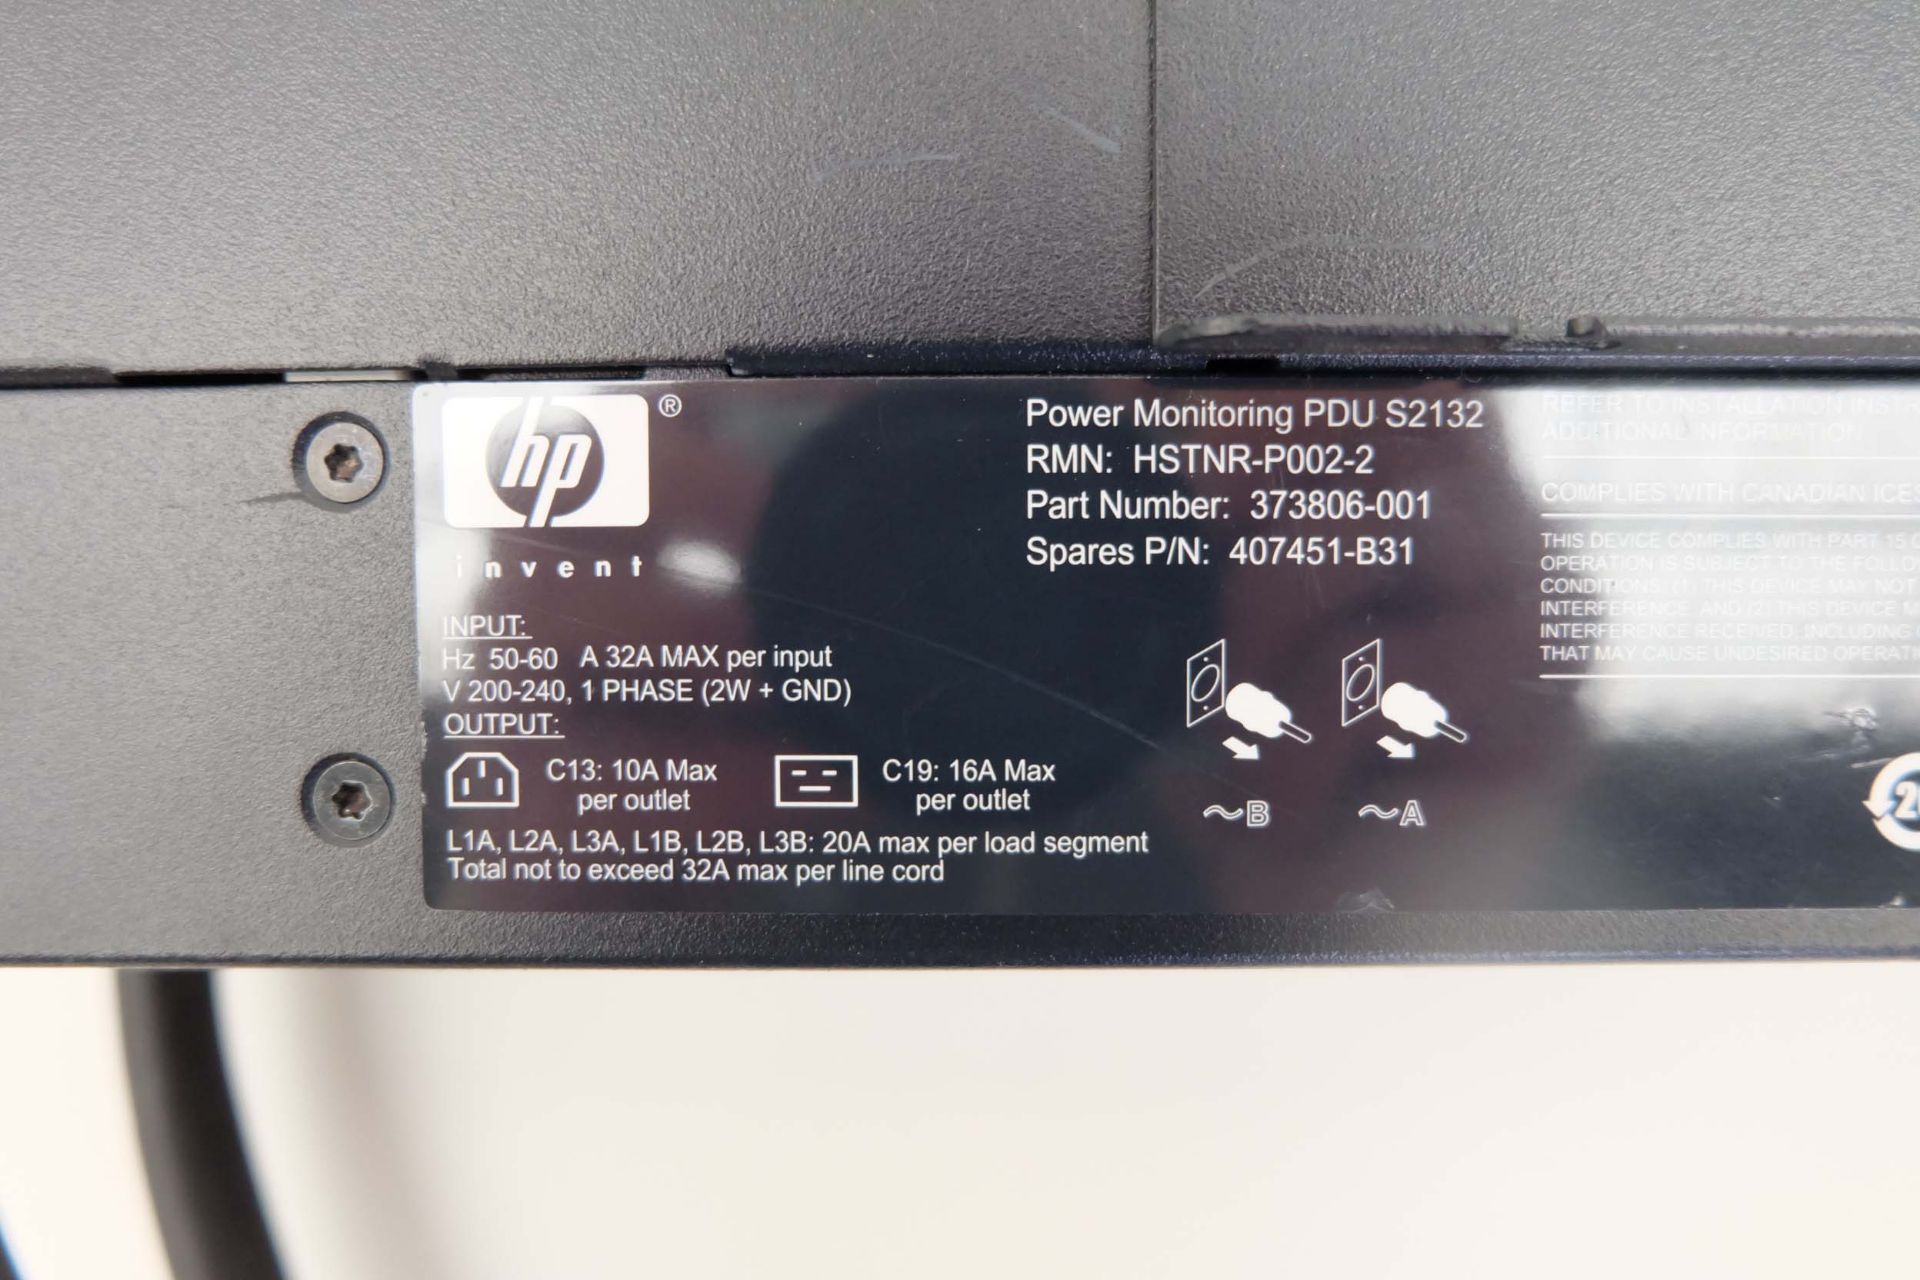 HP Power Monitoring PDU-S2132. Input: 1 Phase (2W - + END) 32 Amp Max. Output: 72 x 10 Amp & 6 x 16 - Image 6 of 9